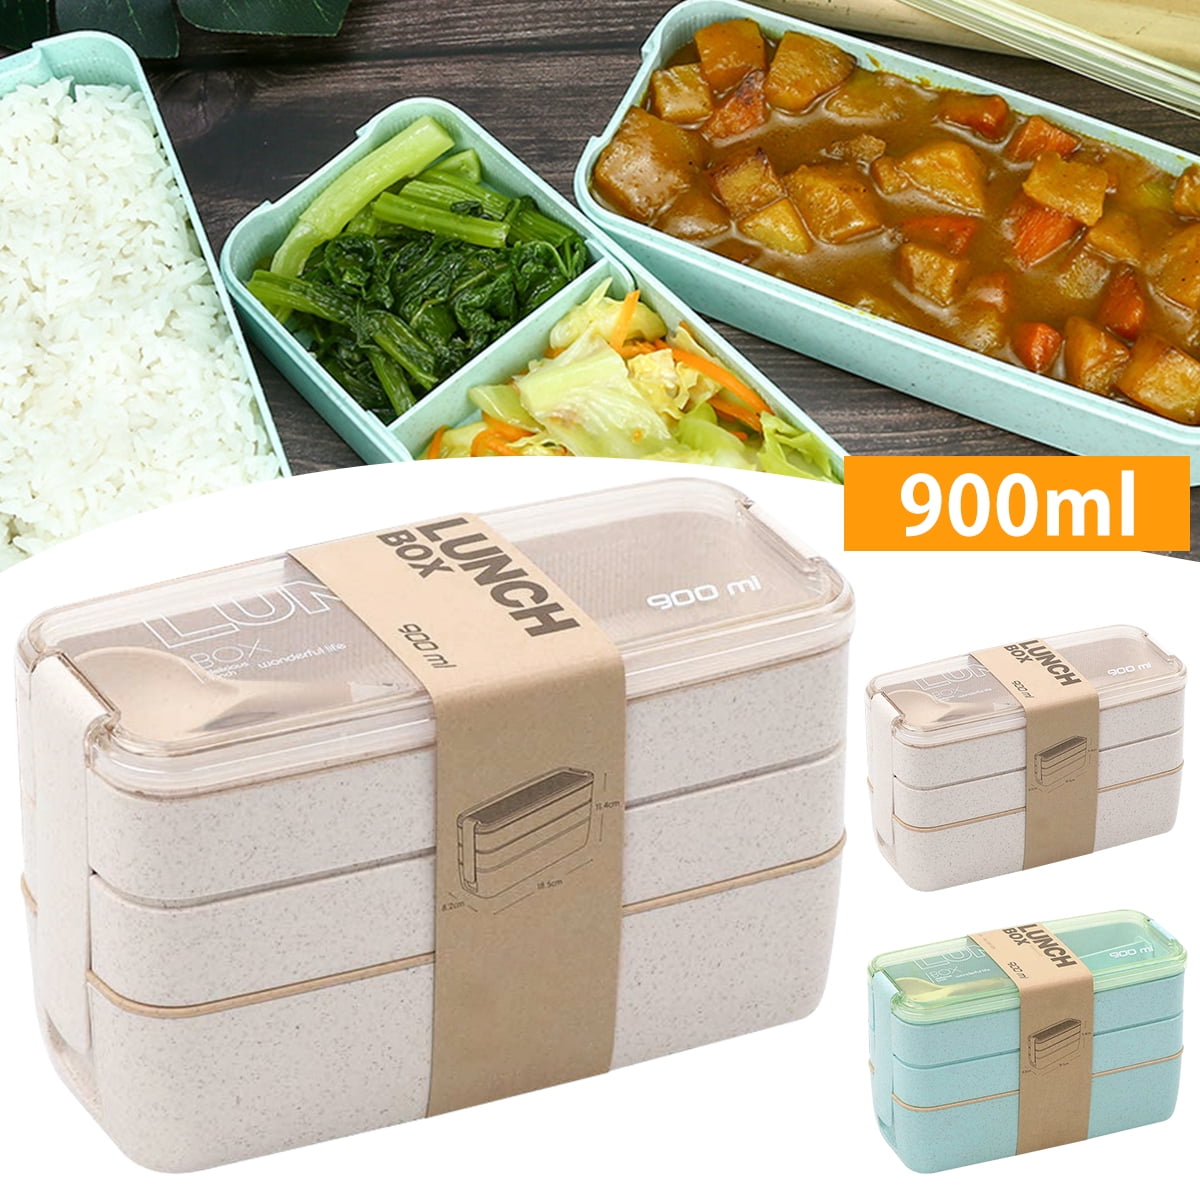 WQJNWEQ Clearance Stackable Bento Box,Lunch Box Kit With Spoon & Fork,  3-In-1 Compartment Whea-t Straw Meal Prep Containers,Leakproof Eco-Friendly